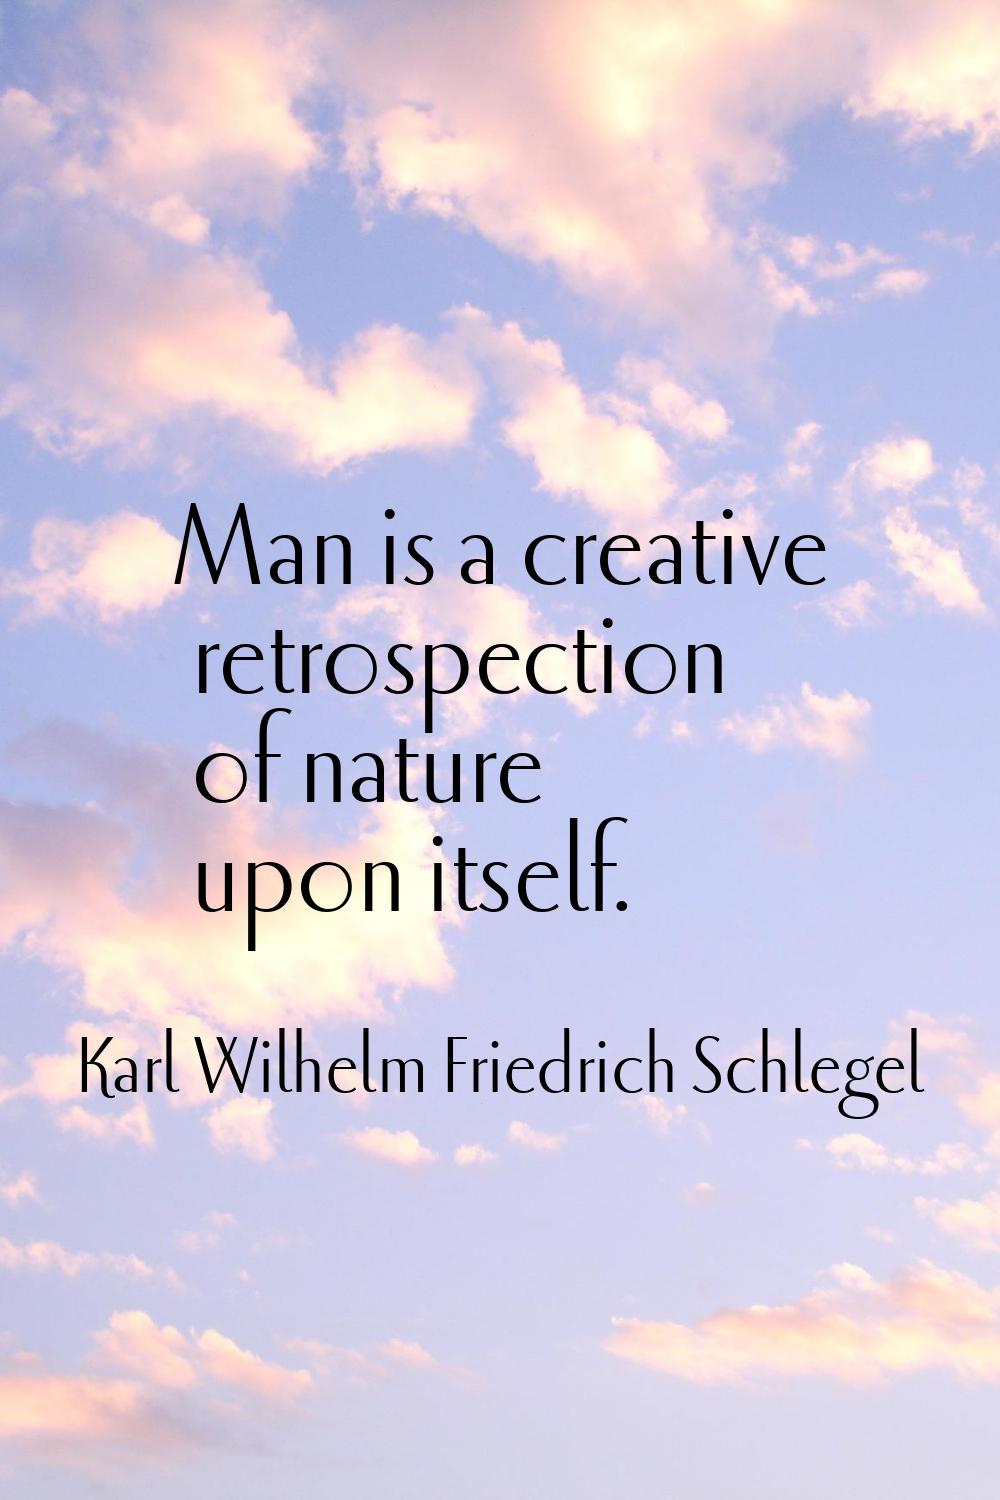 Man is a creative retrospection of nature upon itself.